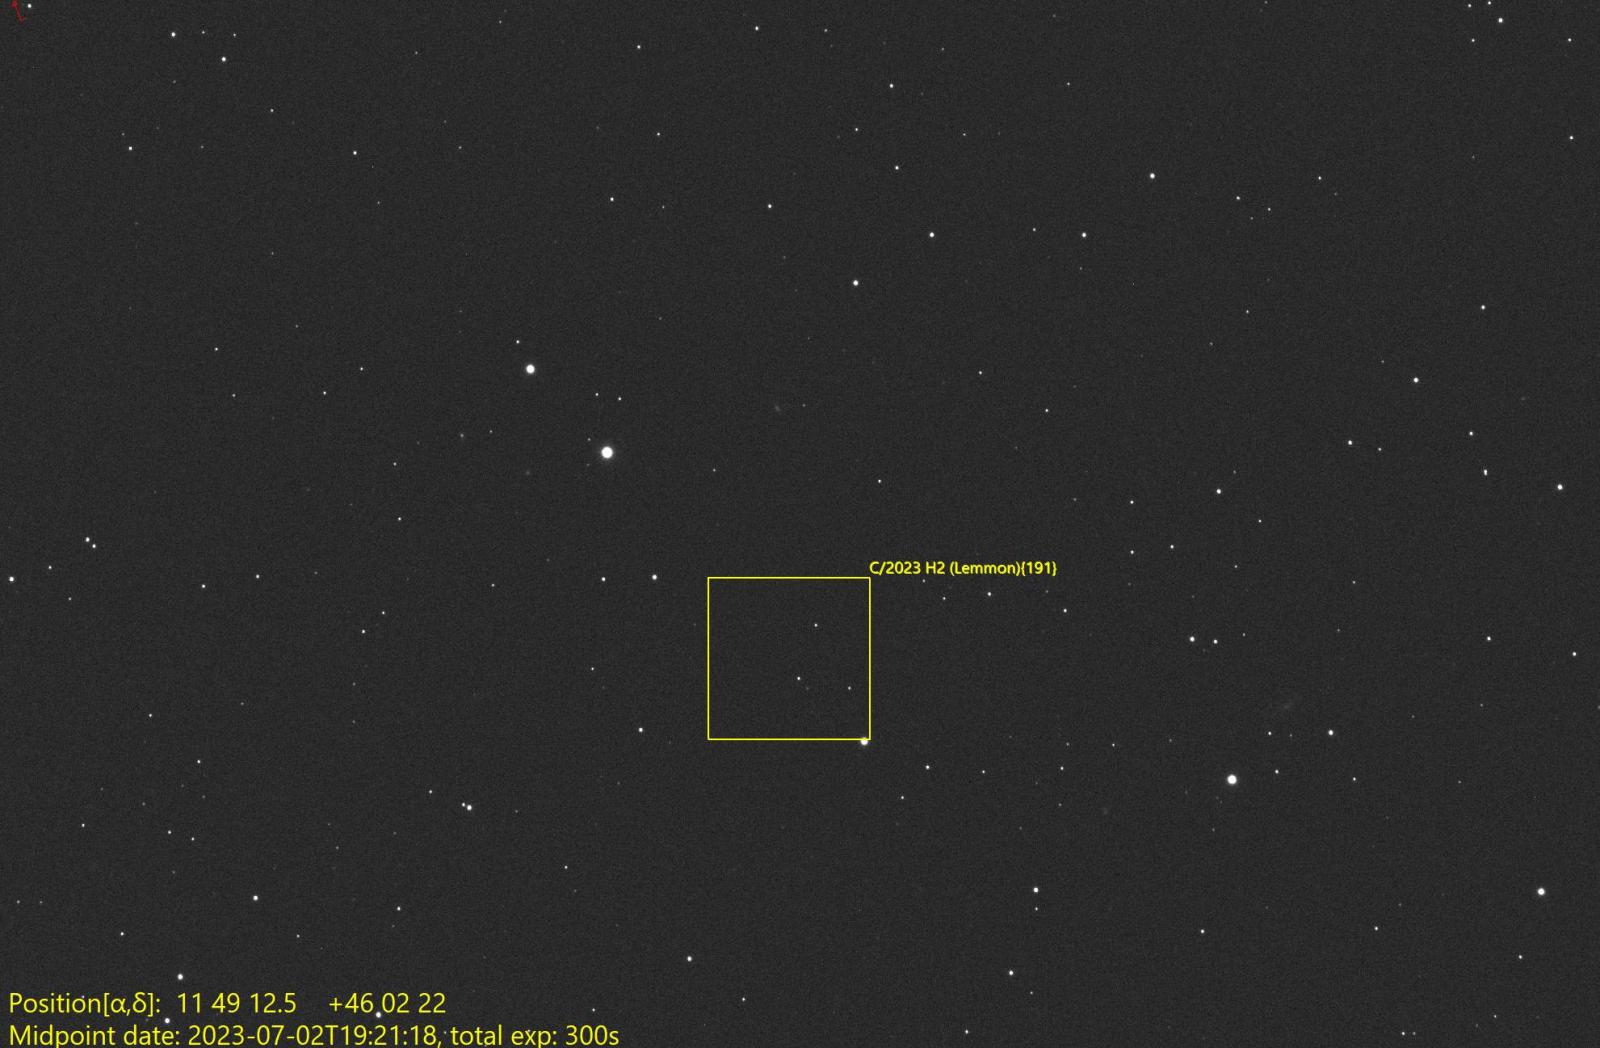 Comet C/2023 H2 (Lemmon) approaches Earth Comet Observing and Imaging